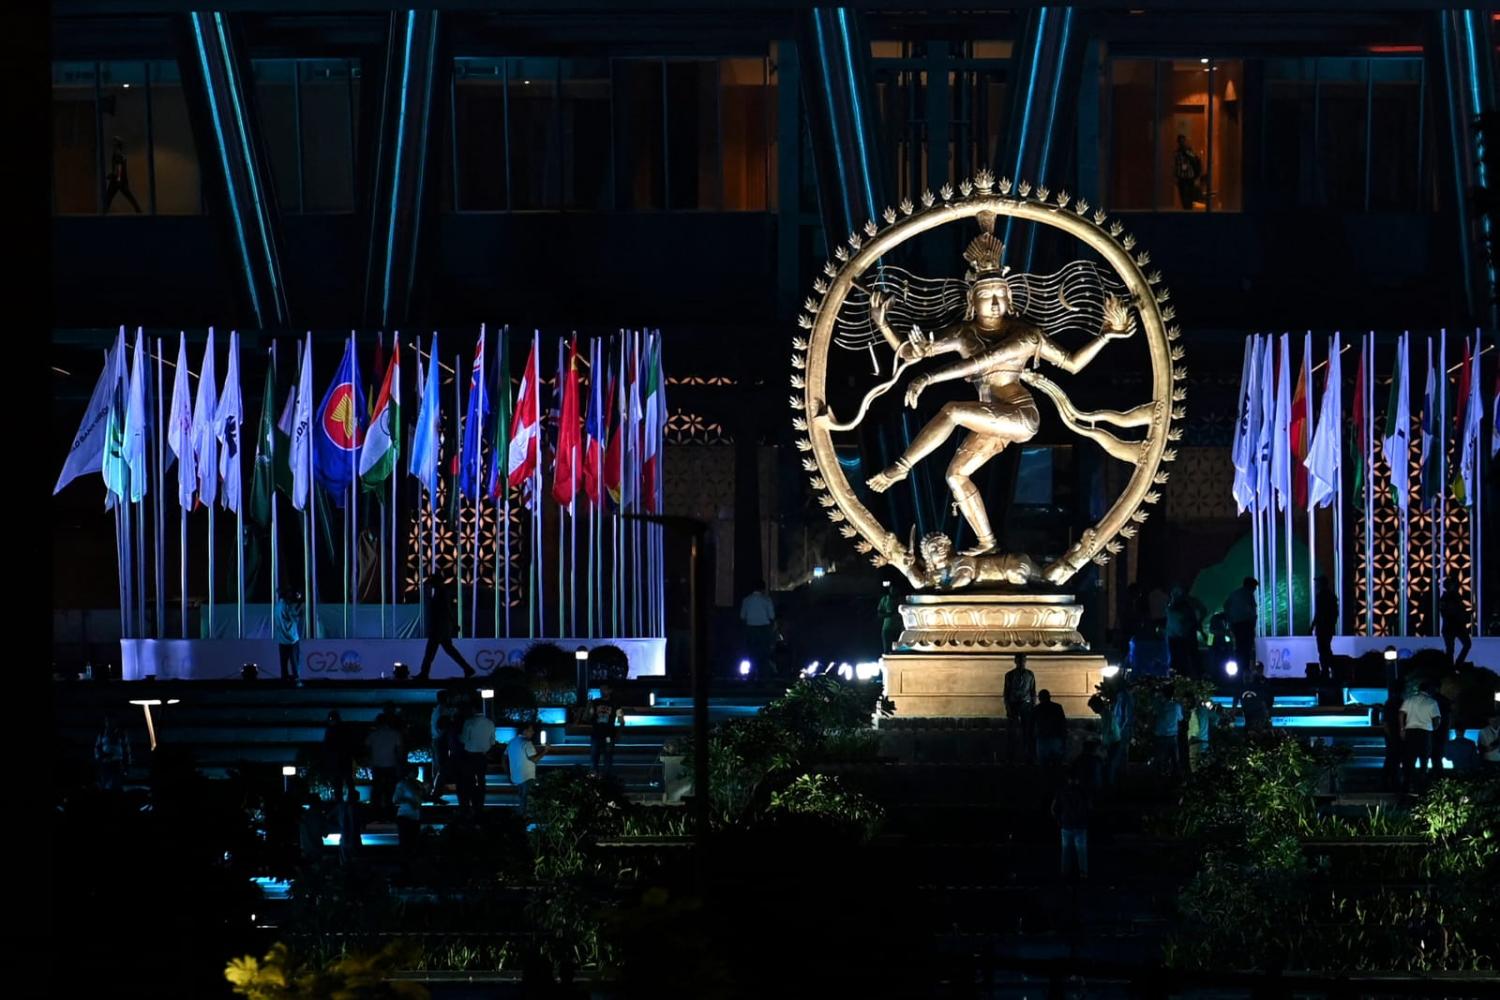 An eight-metre bronze statue "Nataraja" features outside the G20 Summit venue in New Delhi ahead of its commencement (Arun Sankar/AFP via Getty Images)